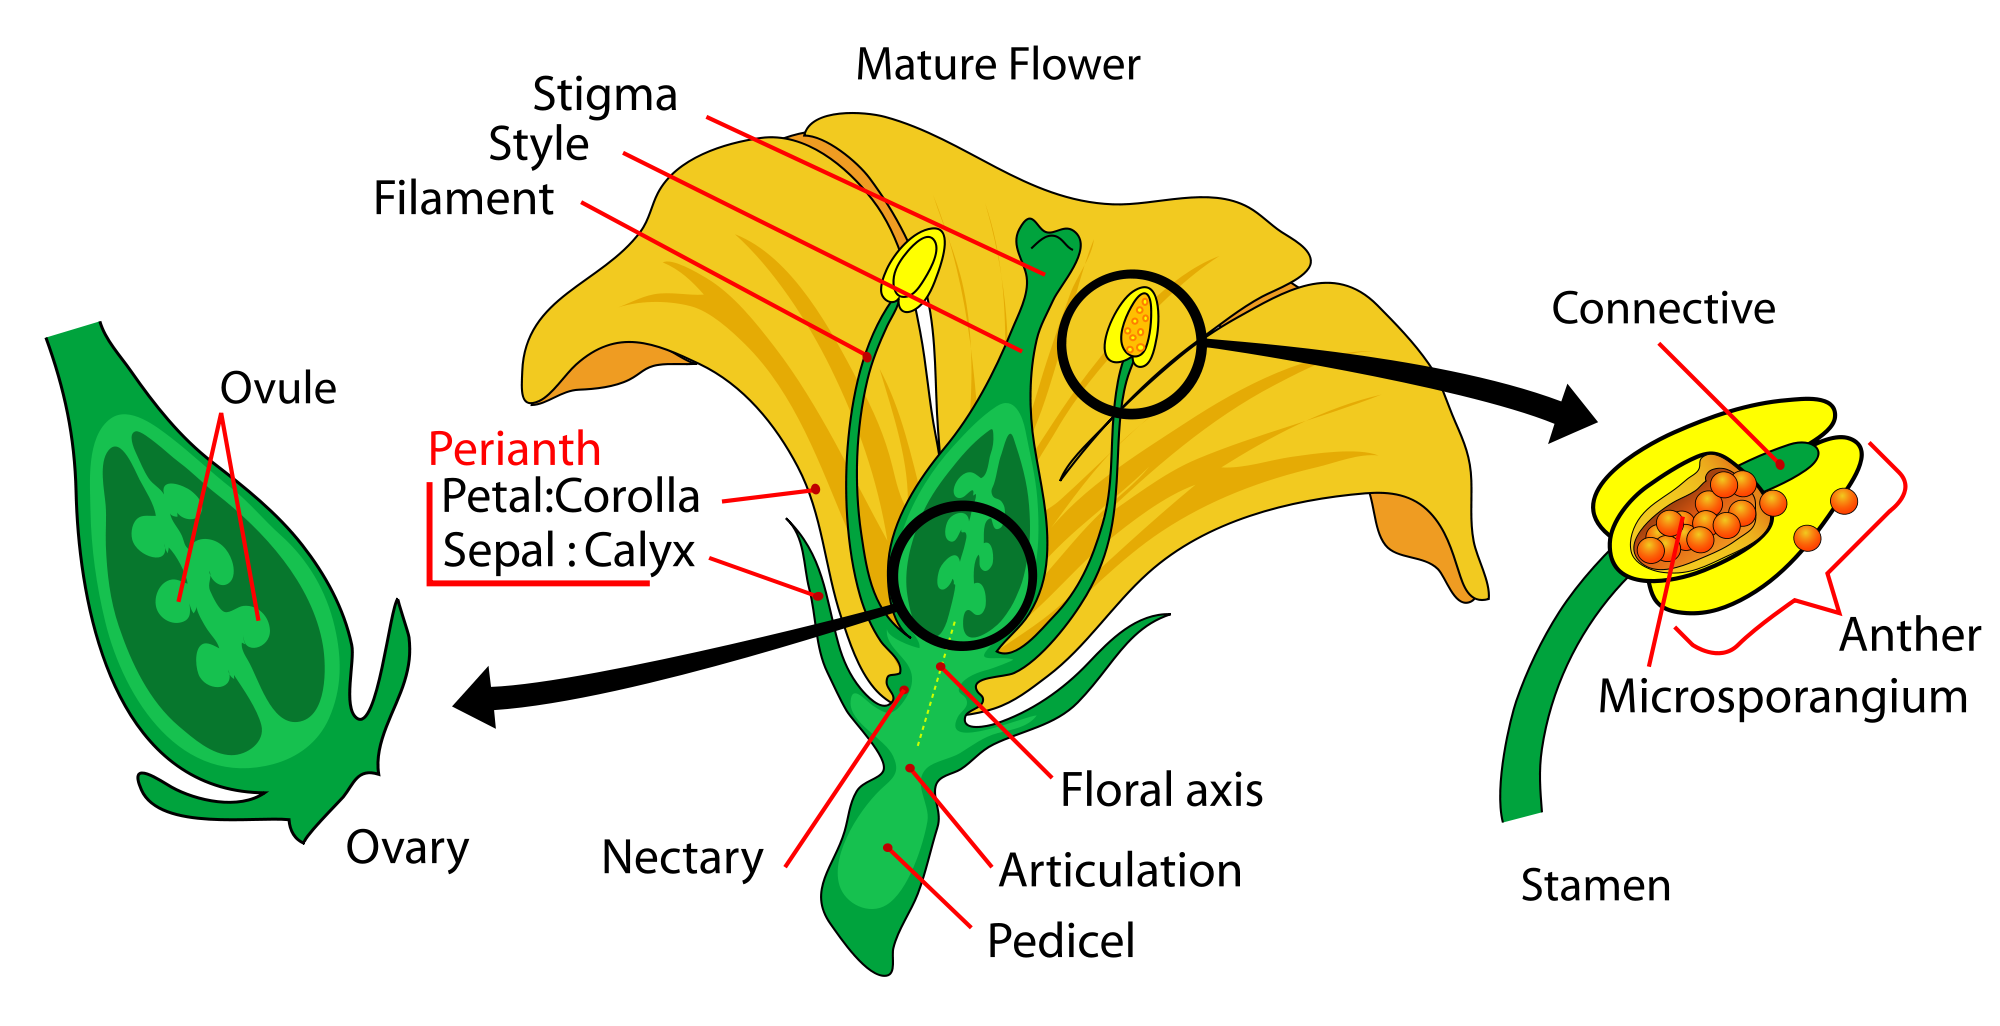  Angiosperms (flowering plants) literally translates to "vesseled seeds". Ovules in angiosperms are borne in ovaries. Ovules (eggs) are fertilized from pollen (sperm) from the anthers. Once pollen attaches to the stigma, &nbsp;pollen grains travel do